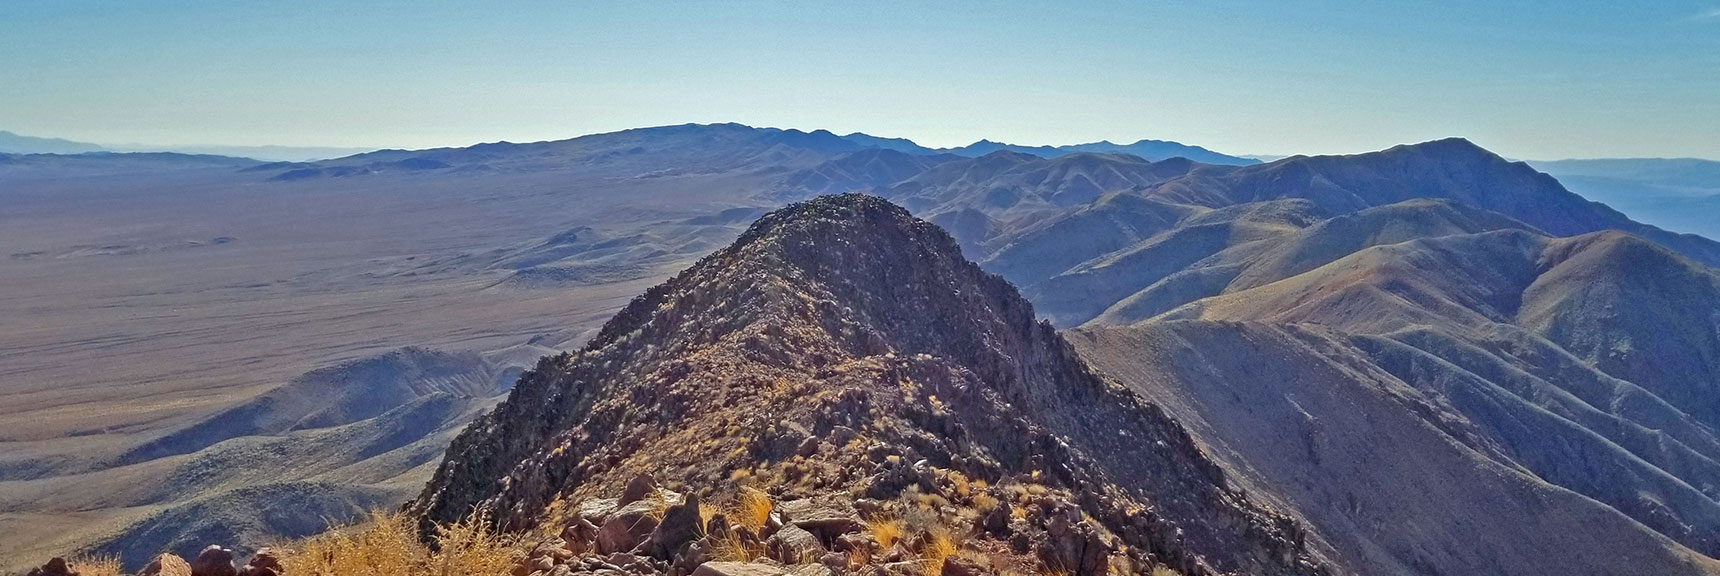 Descending from Mt. Perry Summit Toward Dante's View | Dante's View to Mt. Perry | Death Valley National Park, CA